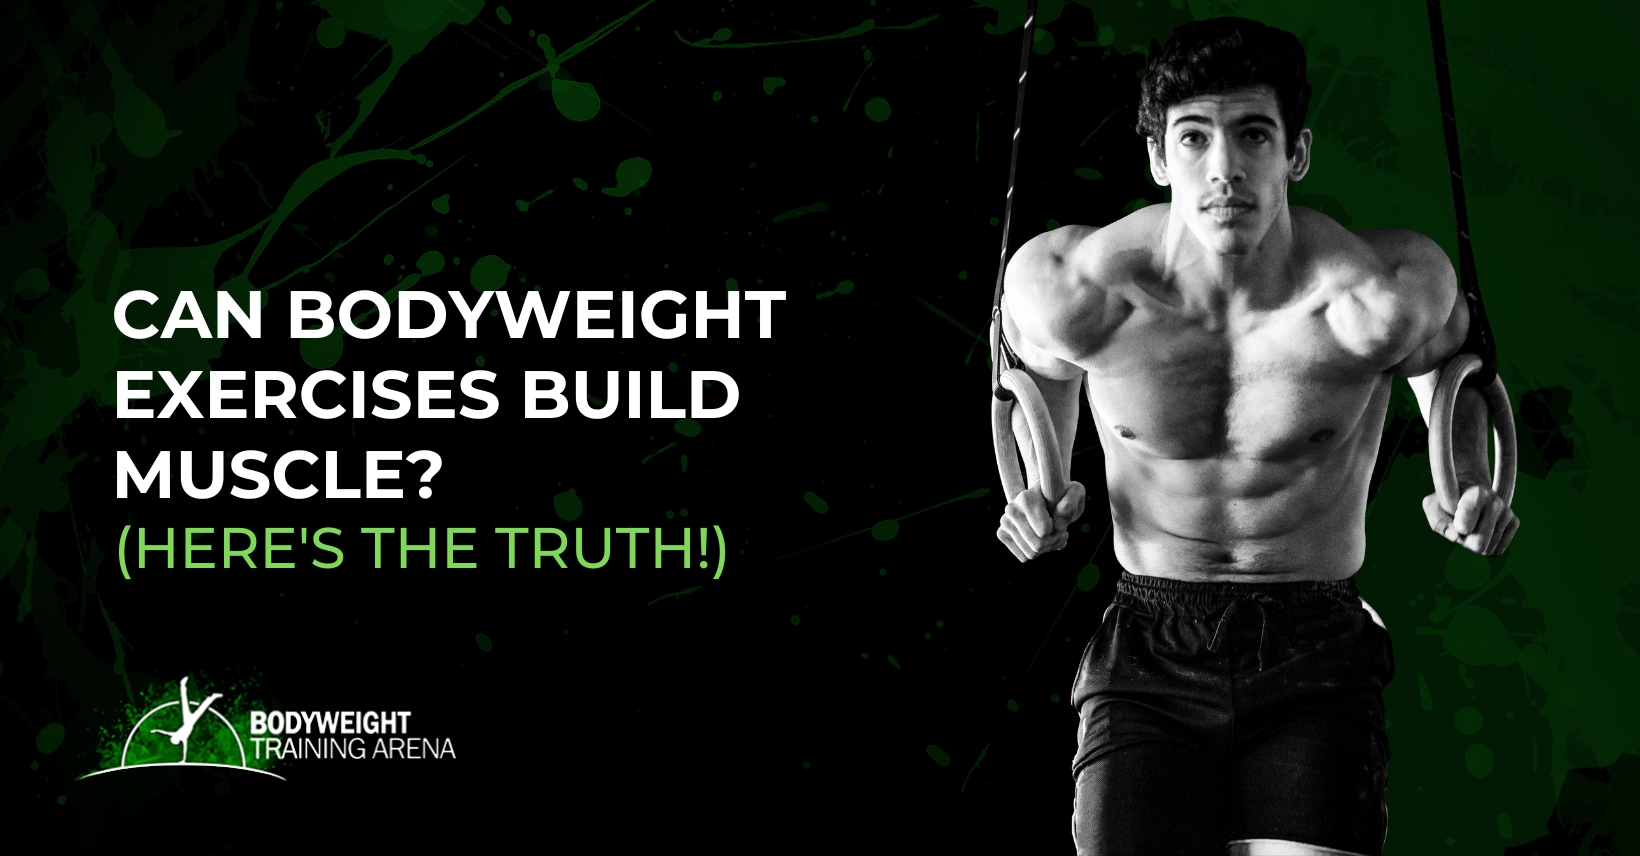 Can Bodyweight Exercises Build Muscle? (Here’s the TRUTH!)